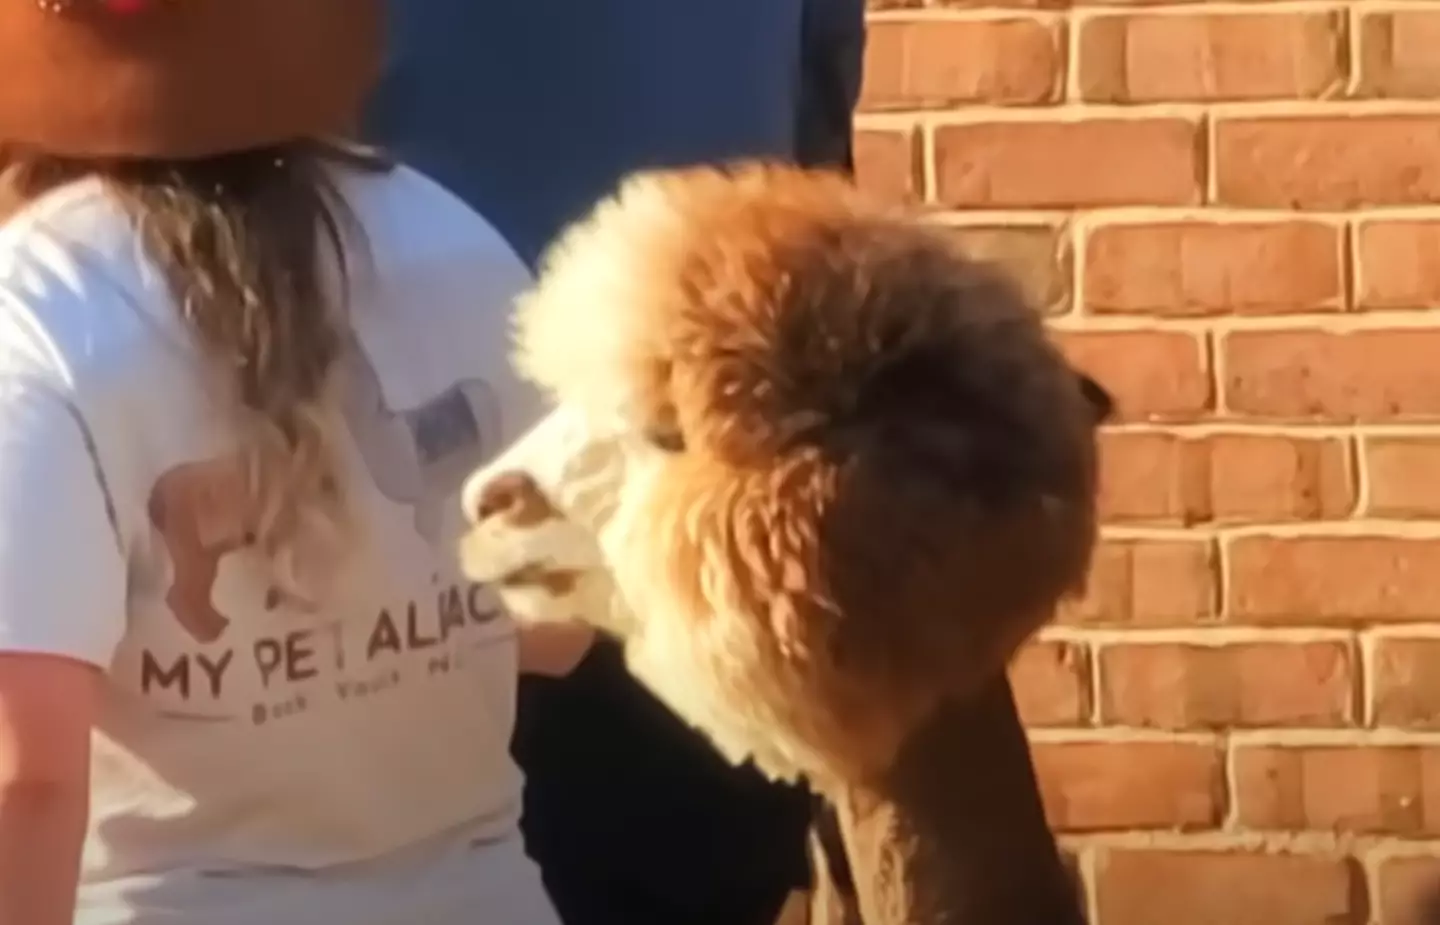 An alpaca was among the crowd which gathered outside the court in wait of Amber Heard and Johnny Depp.